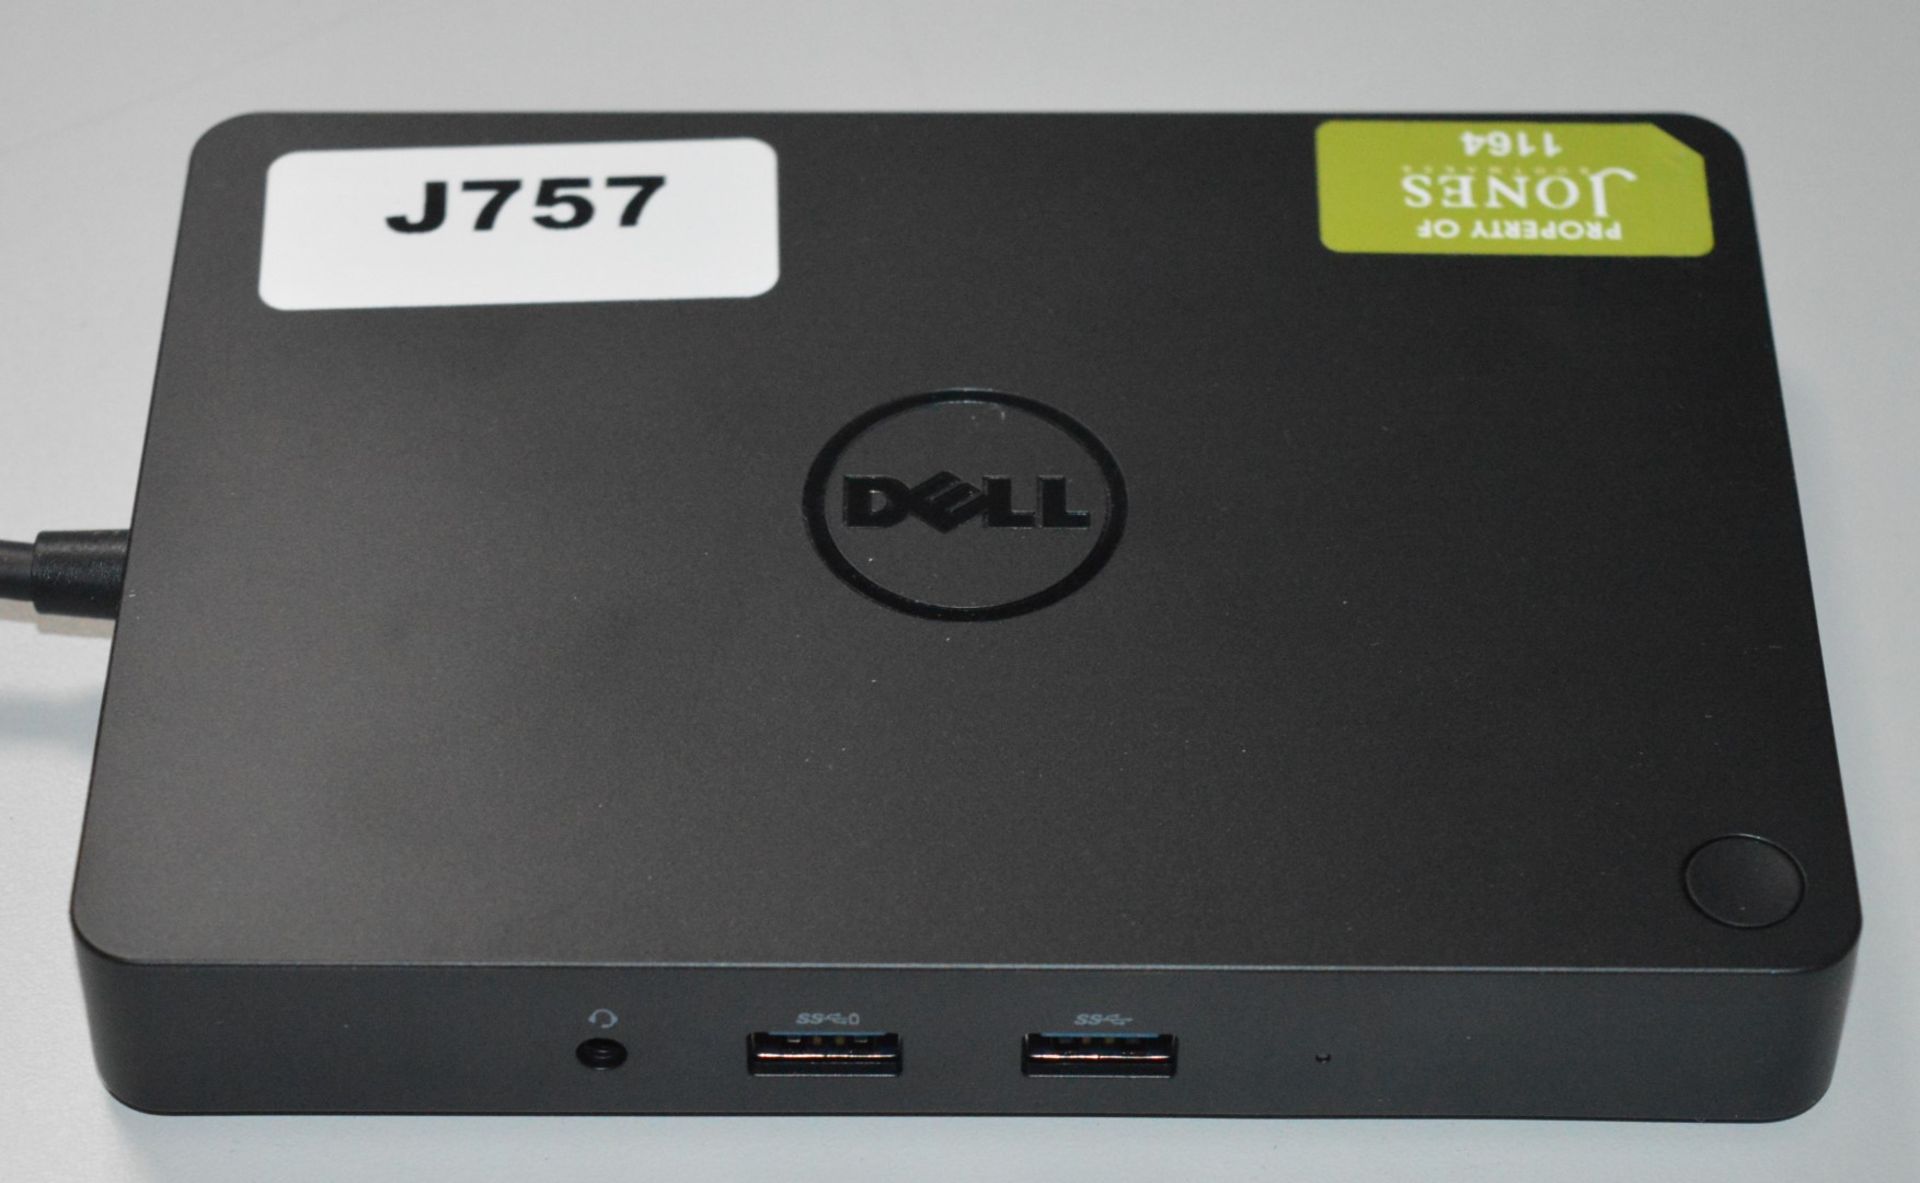 1 x Dell WD15 Laptop Dock With USB Type C Connections - CL285 - Ref J757 - Location: Altrincham